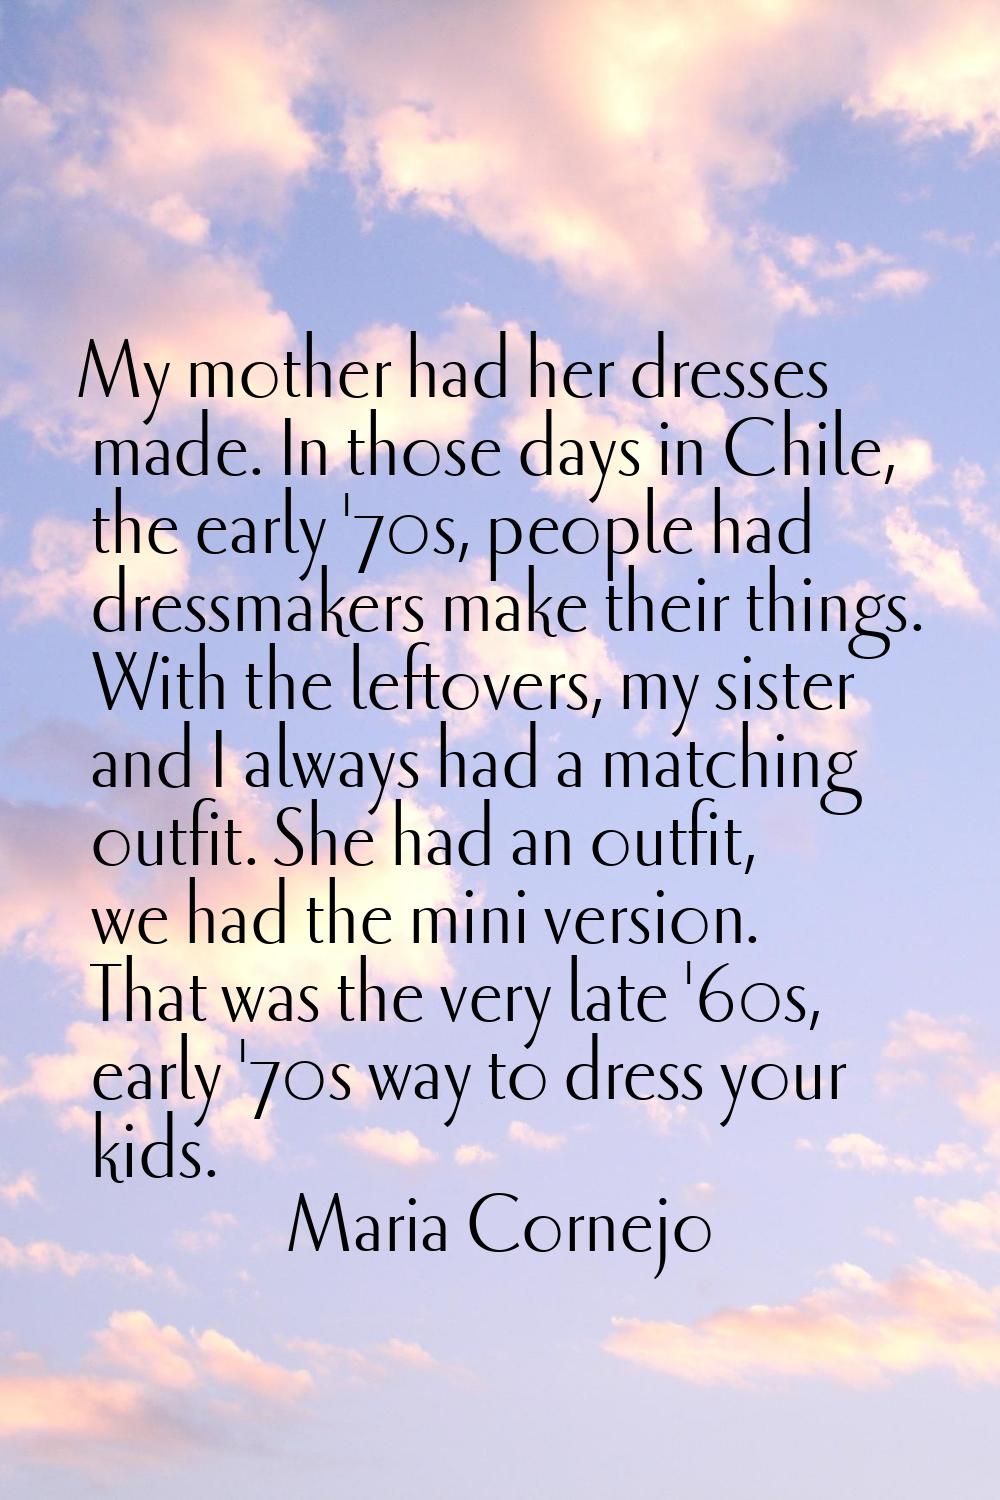 My mother had her dresses made. In those days in Chile, the early '70s, people had dressmakers make